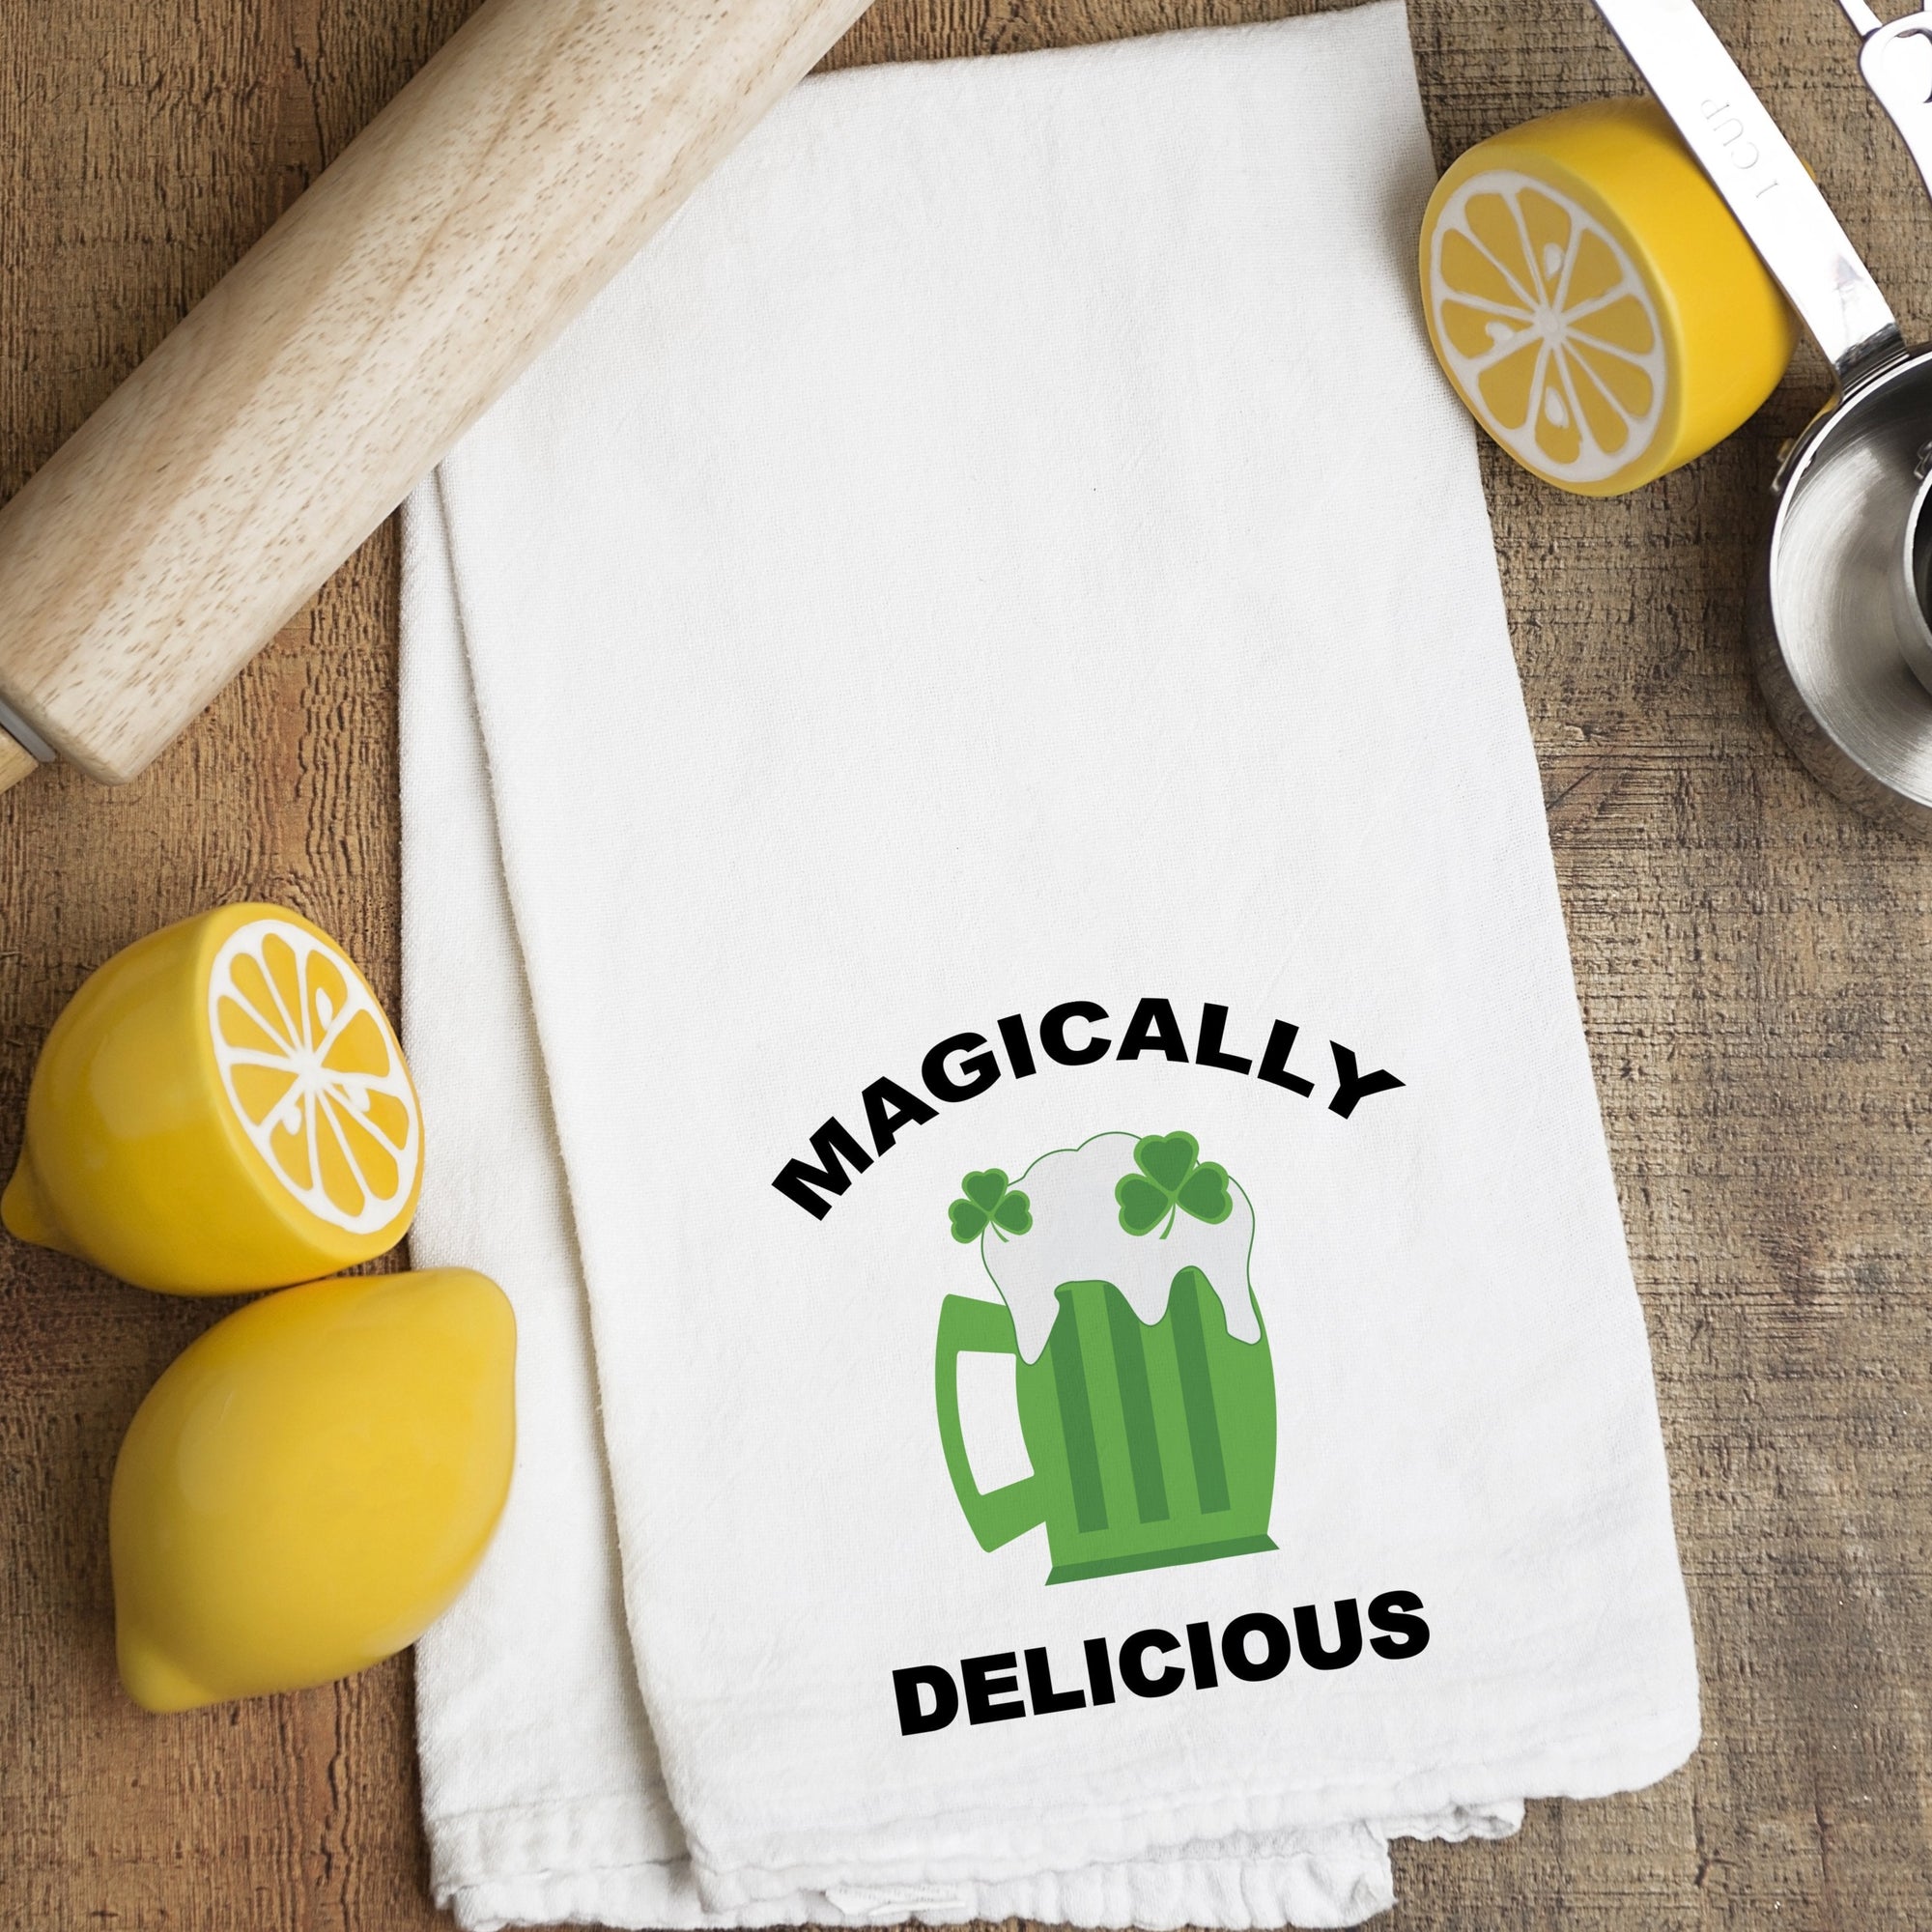 St. Patrick's Day Tea Towel, Flour Sack Towel, Green Beer Magically Delicious, PIPSY.COM